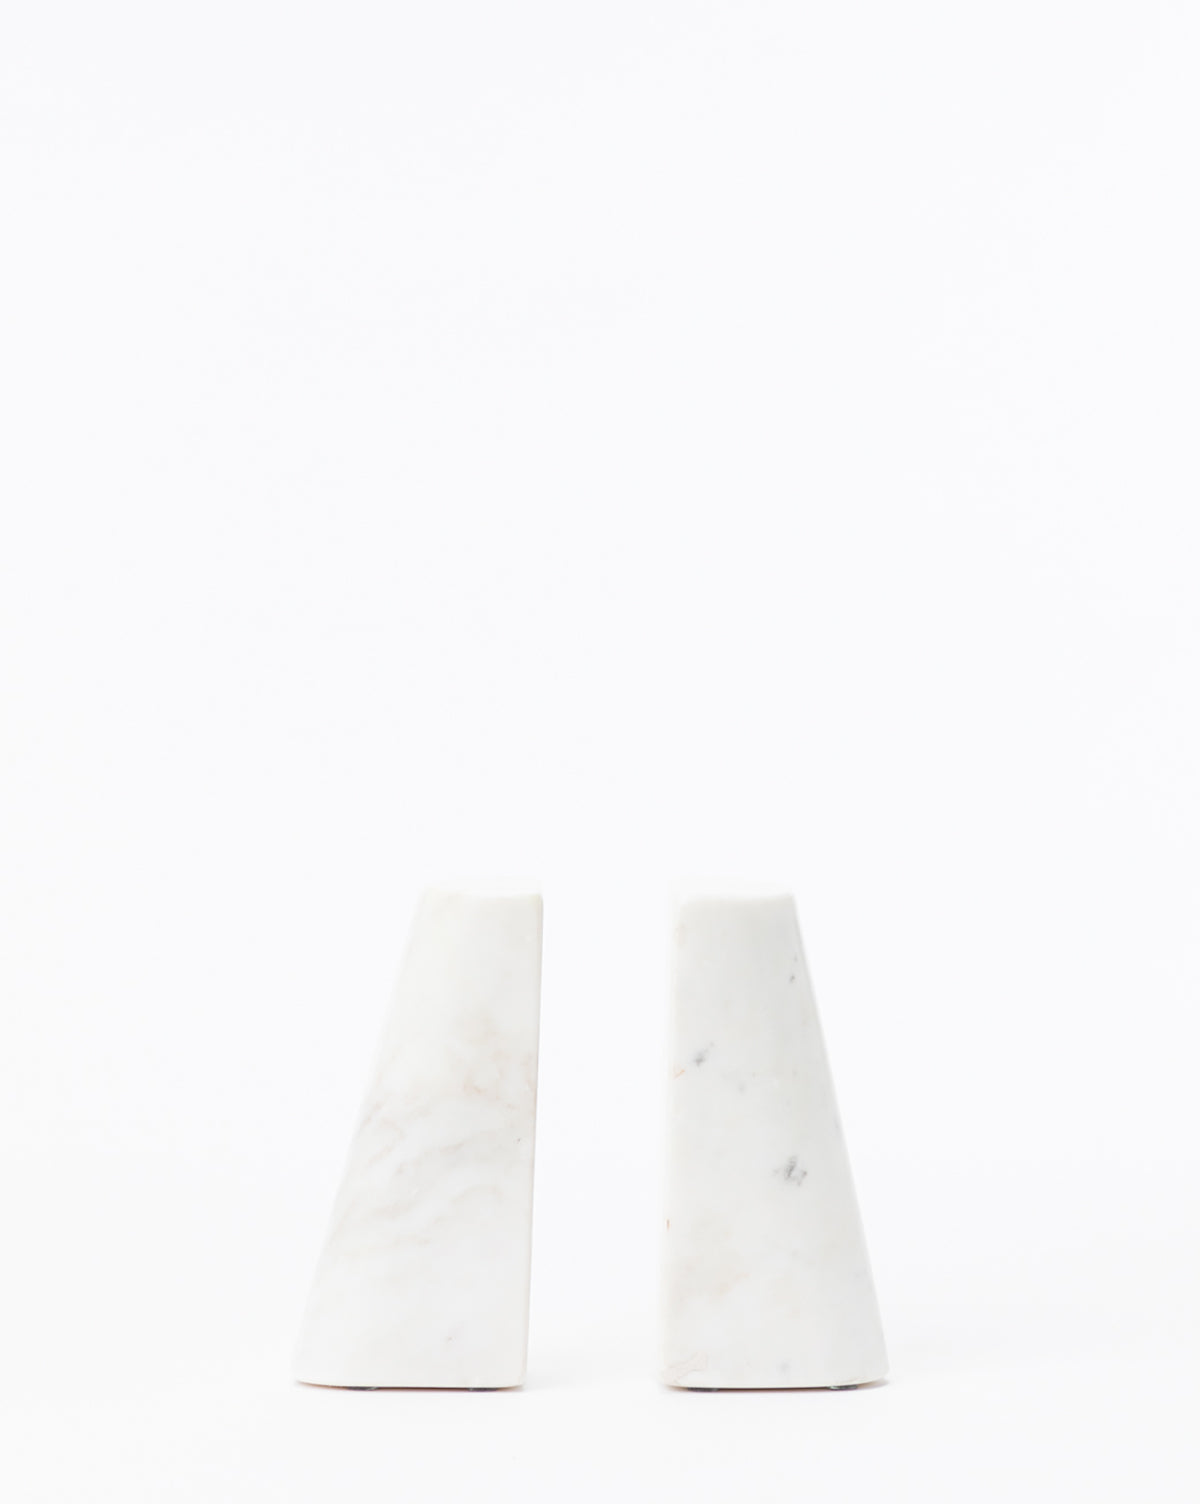 Bloomingville, Tapered Marble Bookends (Set of 2)